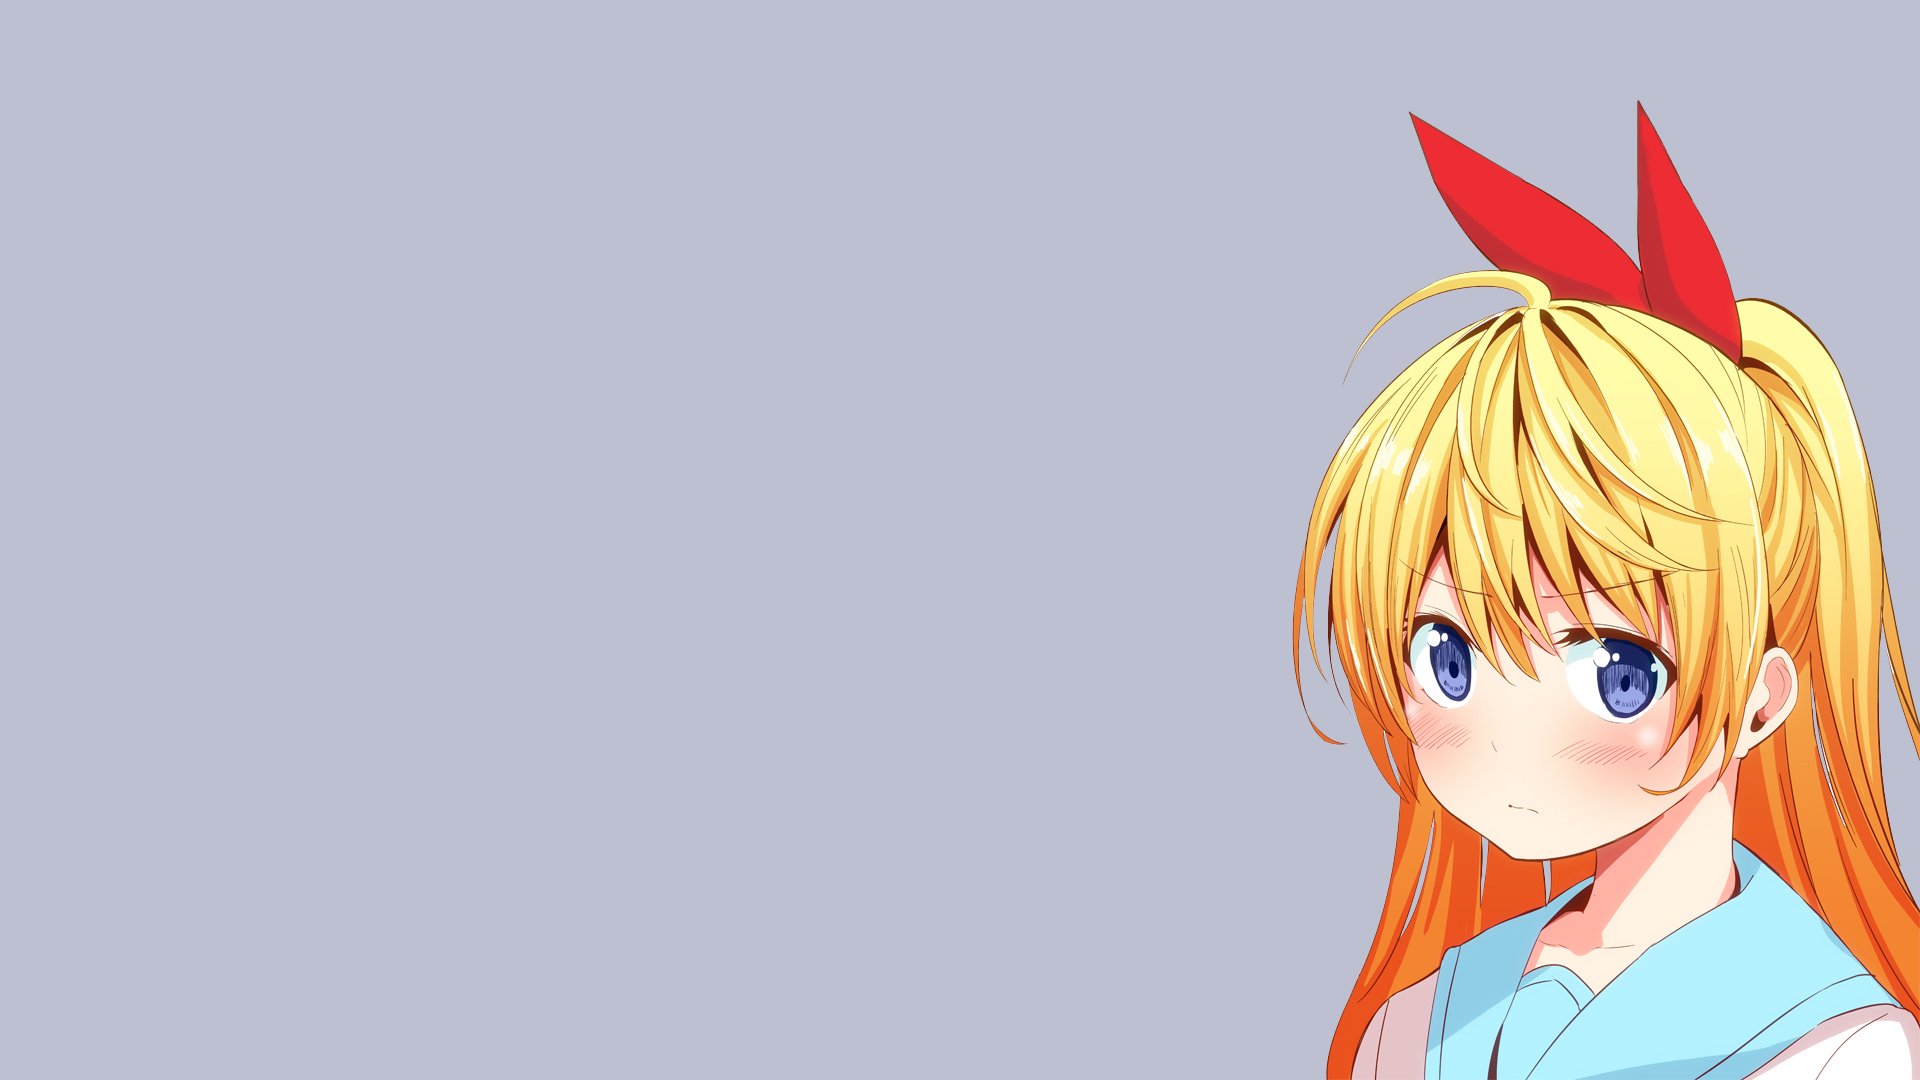 Nisekoi Wallpapers - Anime Girl With Blond Hair And Red Bow , HD Wallpaper & Backgrounds